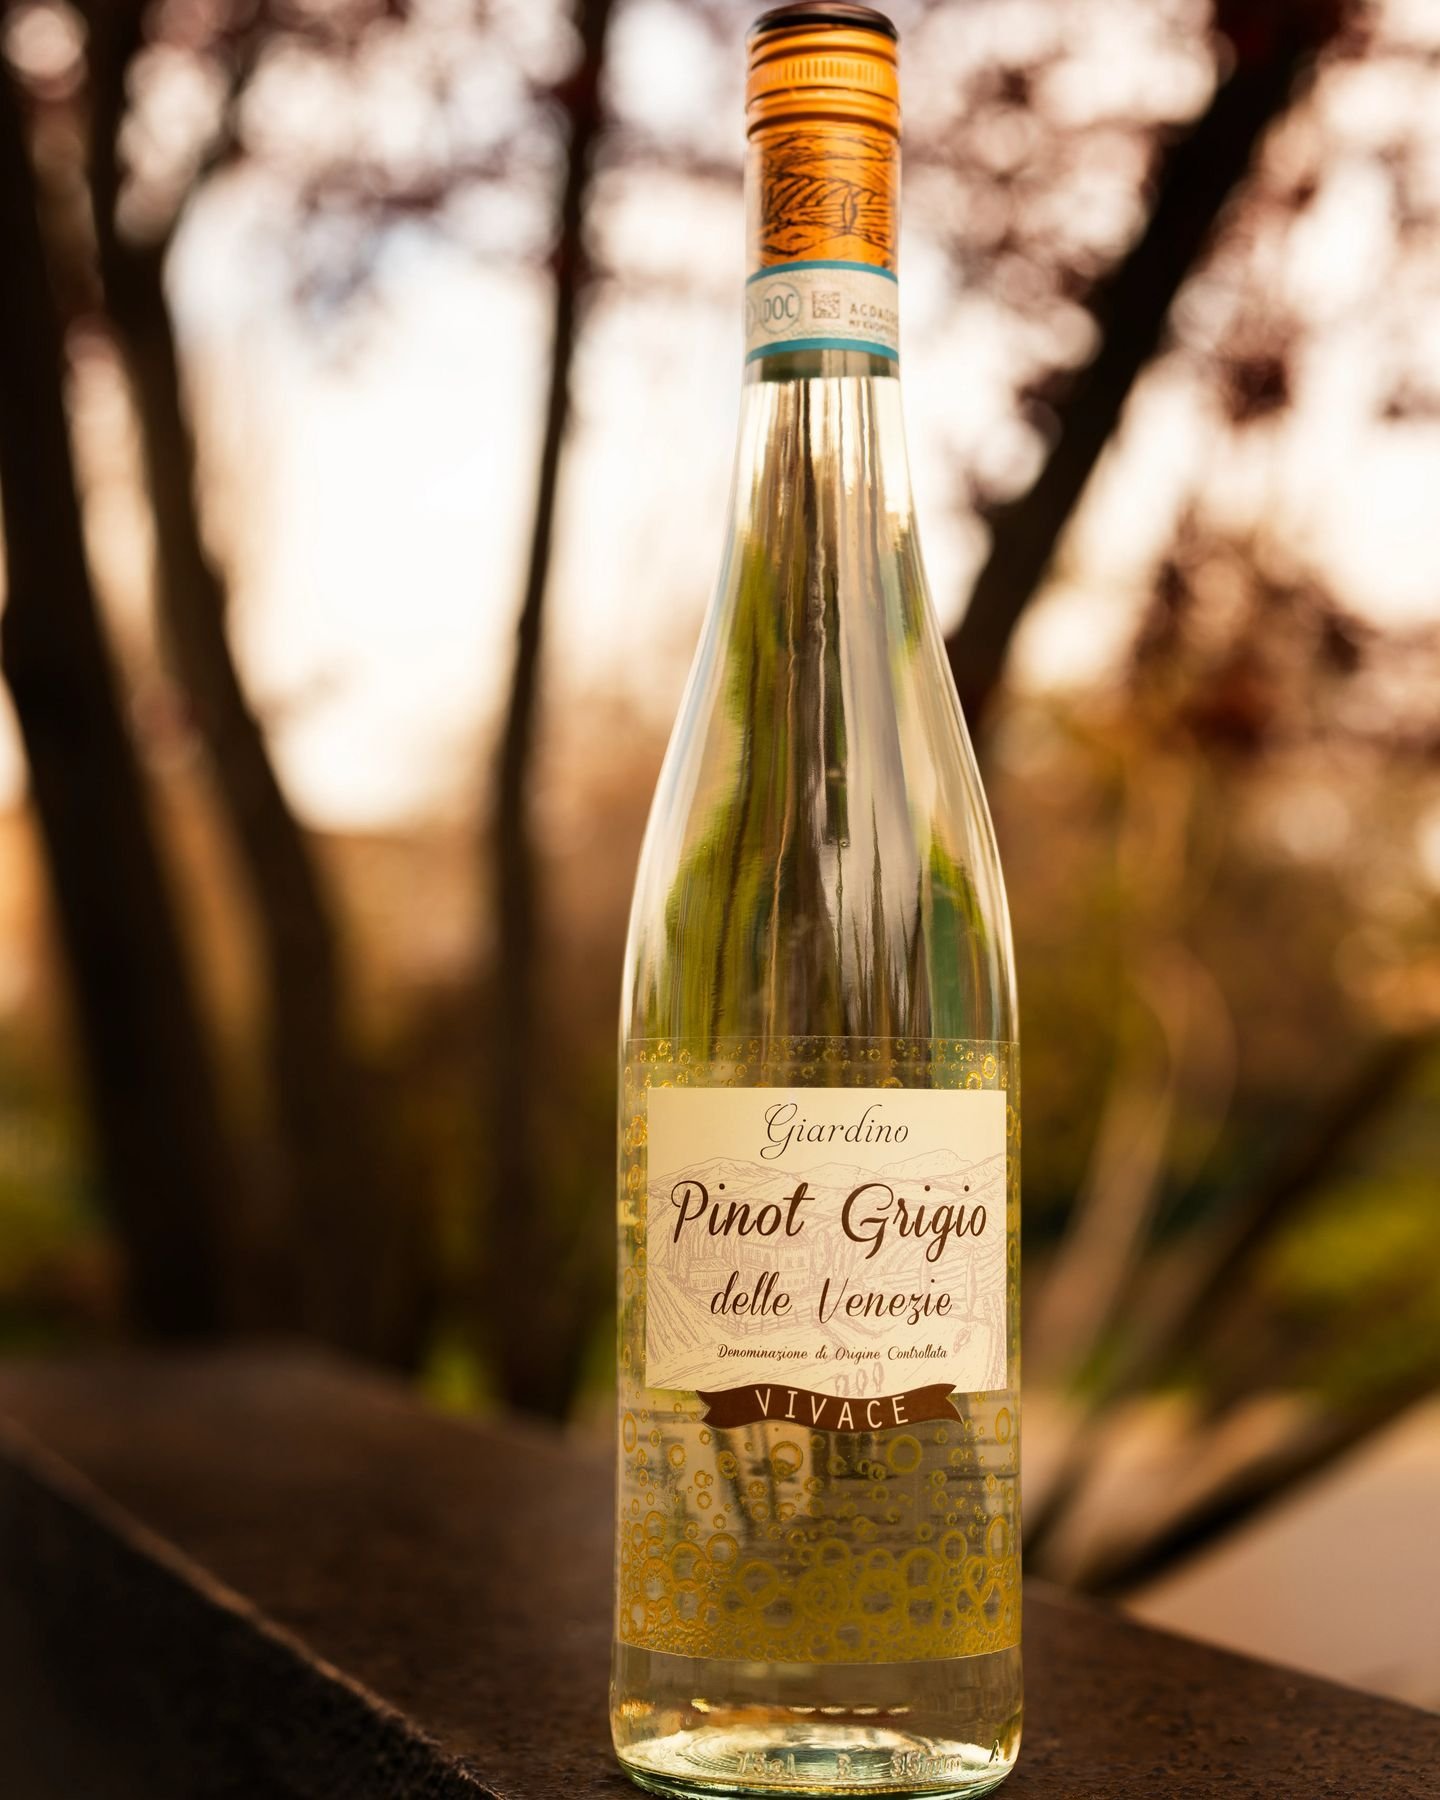 🍐The juicy pear and crisp apple aroma of Giardino Pinot Grigio Vivace hit your senses. In every sip, you could trace hints of fresh citrus and wafts of subtle floral undertones! 
 
🥂Savoring its gentle sparkle and smooth dryness, you'll realize how